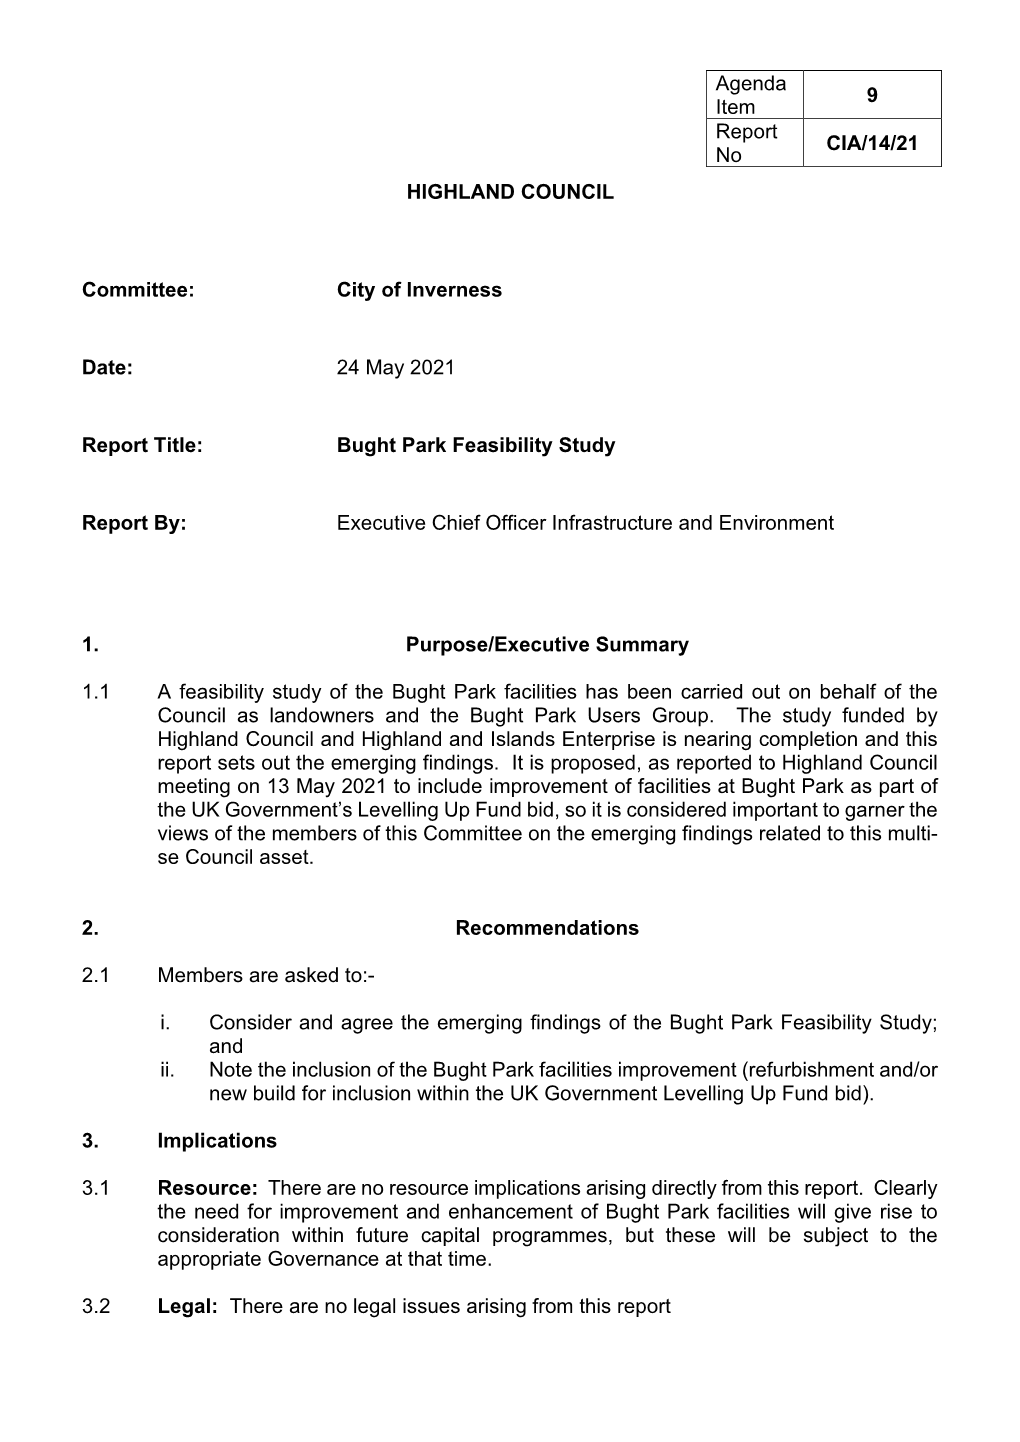 9. Bught Park Feasibility Study